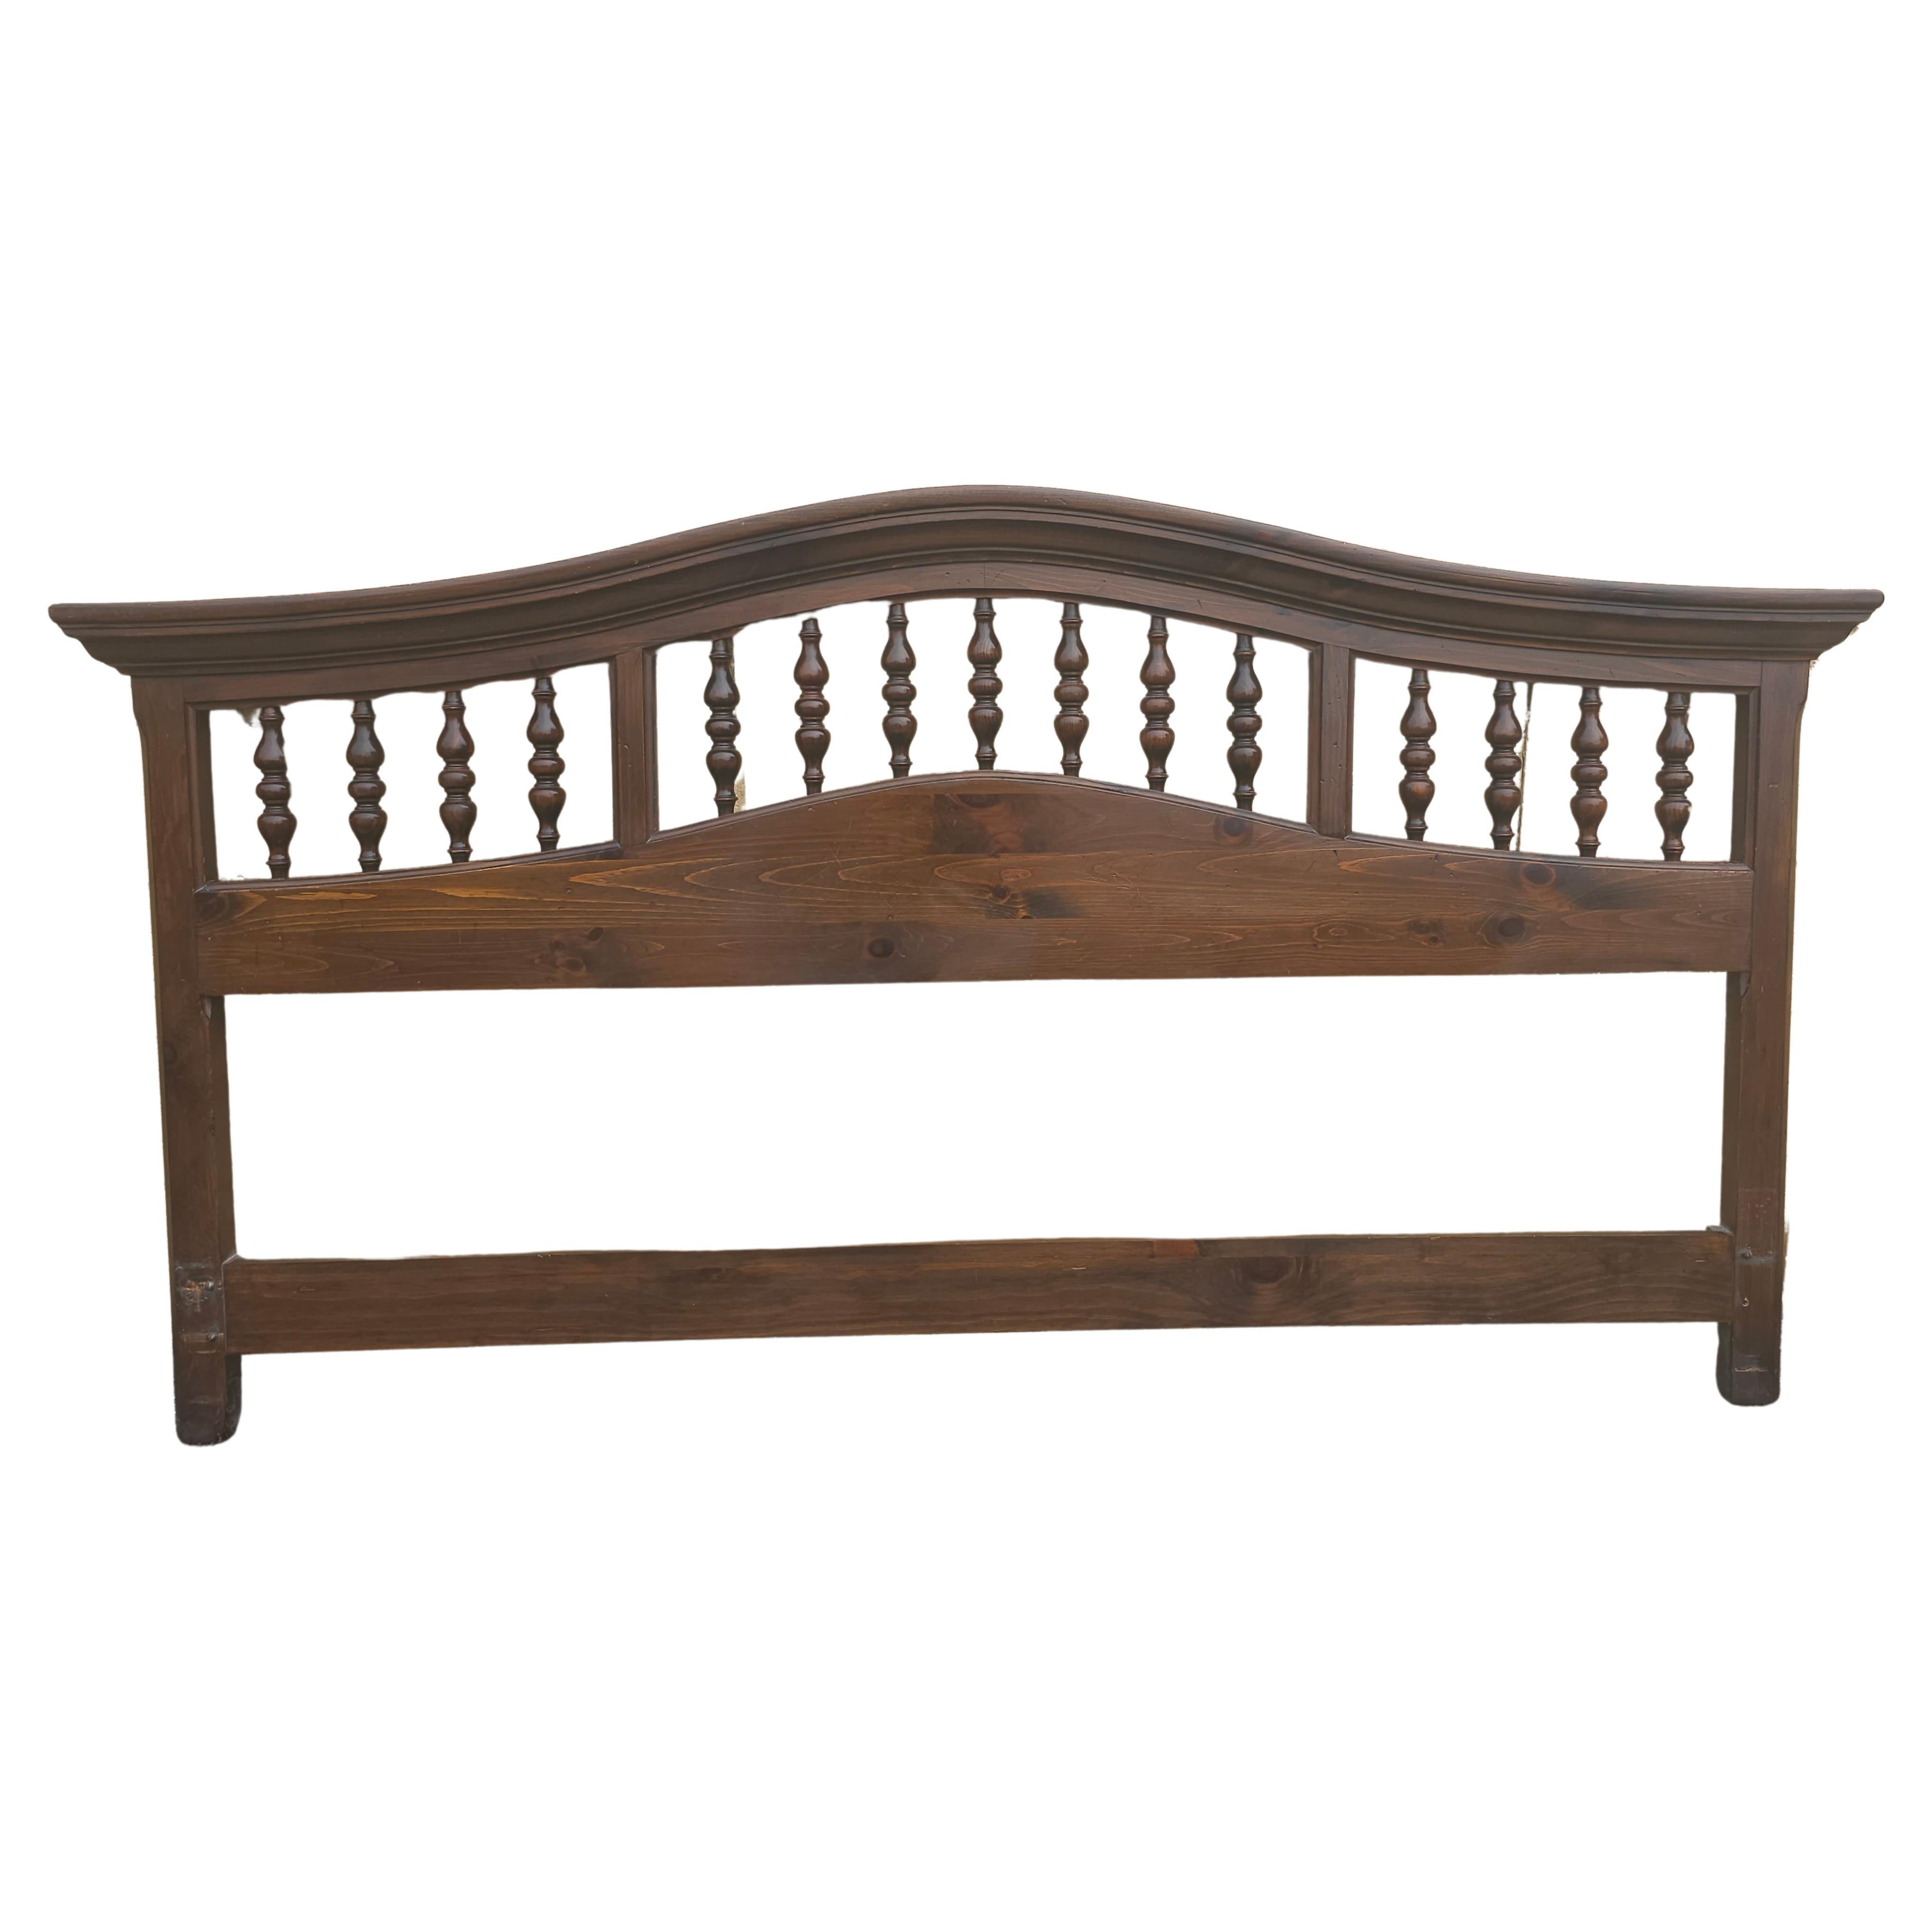 Mid-20th Century Antiqued Pine King Size Arched Top Headboard For Sale